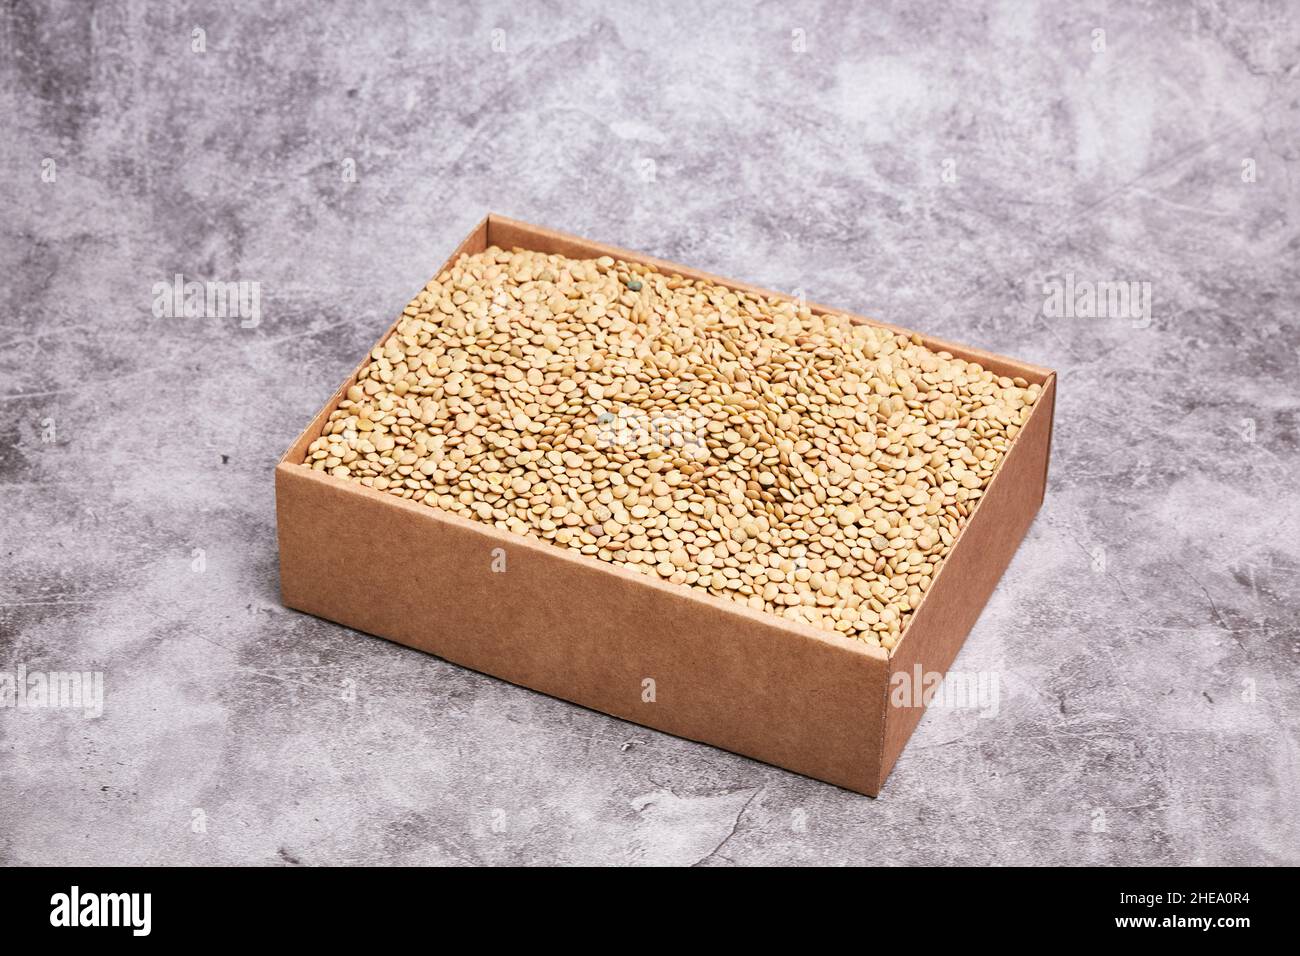 Cardboard box with dried green lentils on a gray stone background. Healthy and vegan food concept Stock Photo